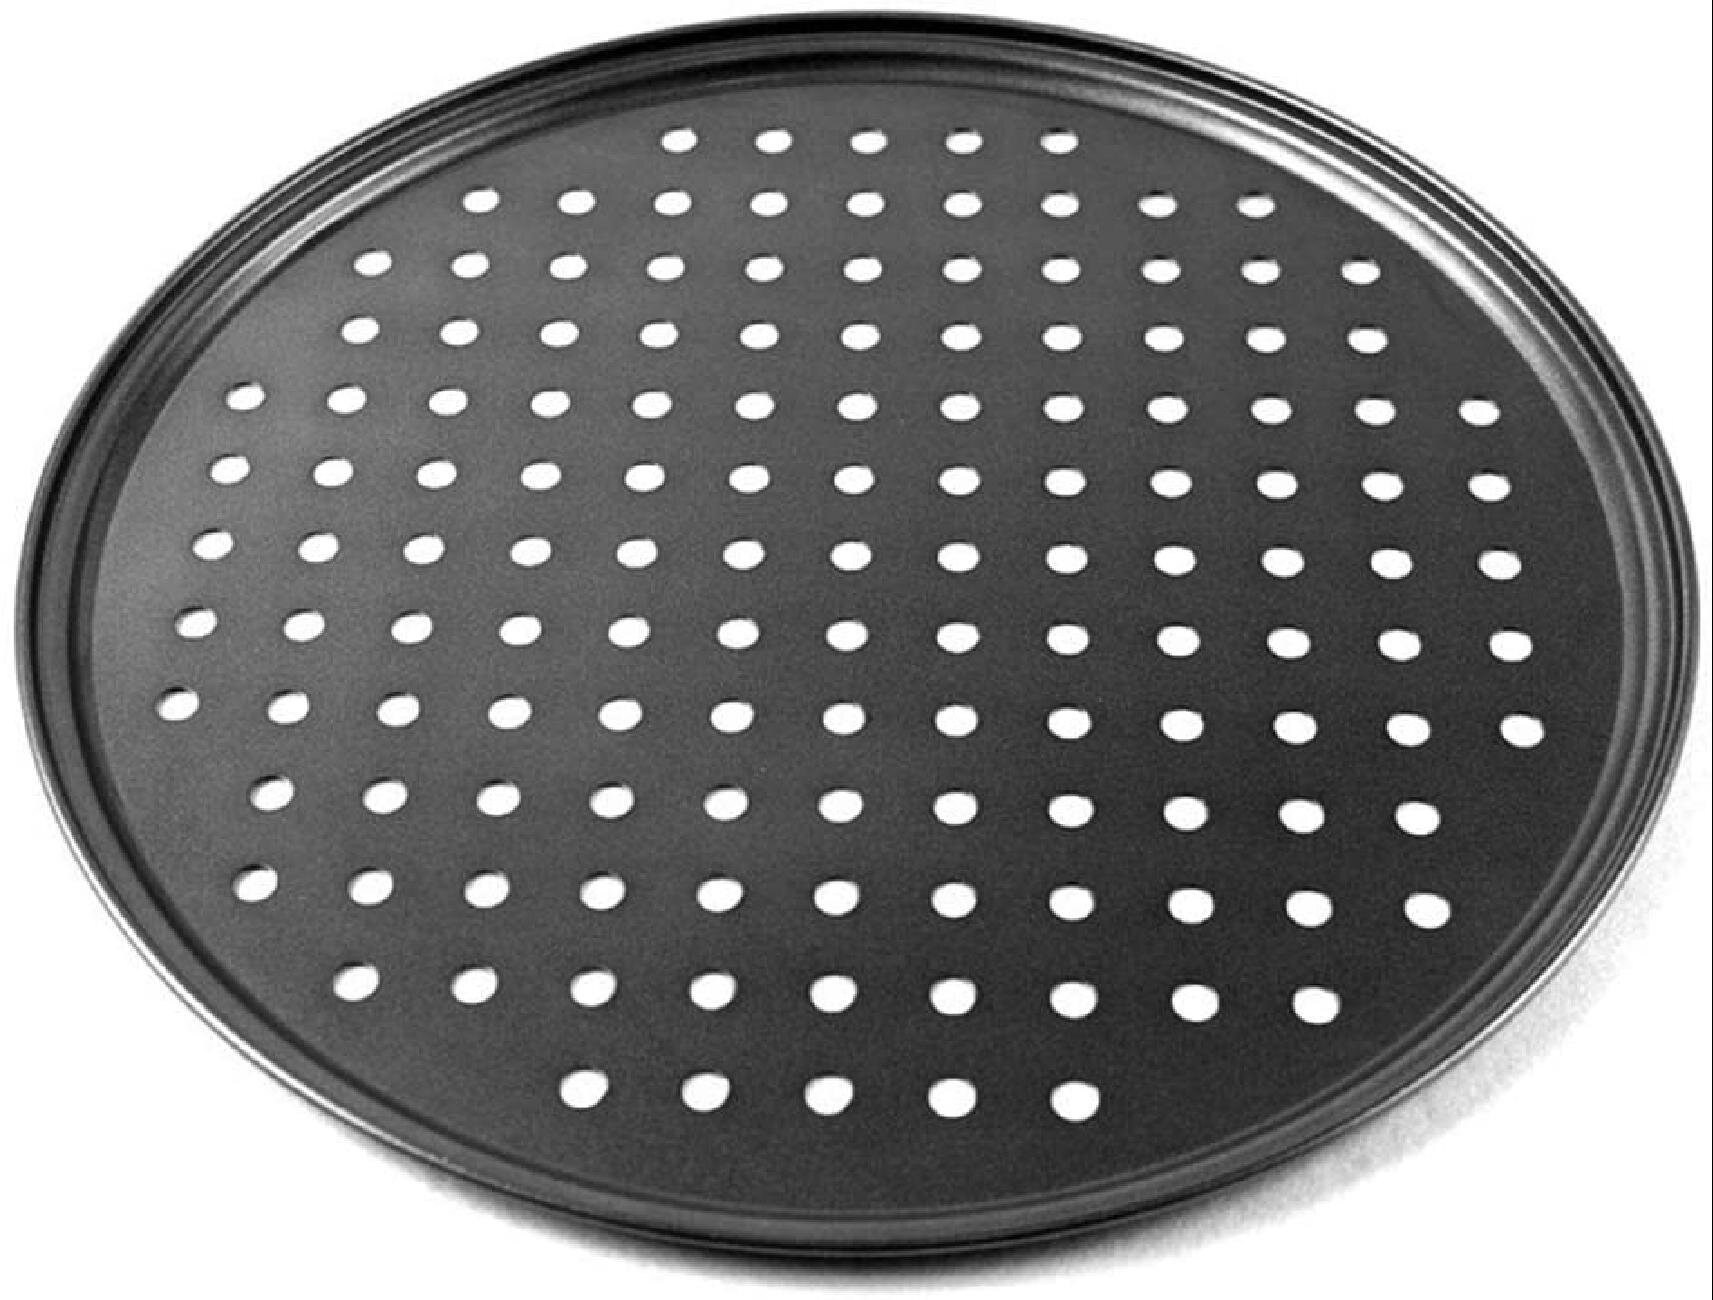 Pizza Baking with 4 Pizza Pans Non-Sticky Perforated Pizza Tray for Oven